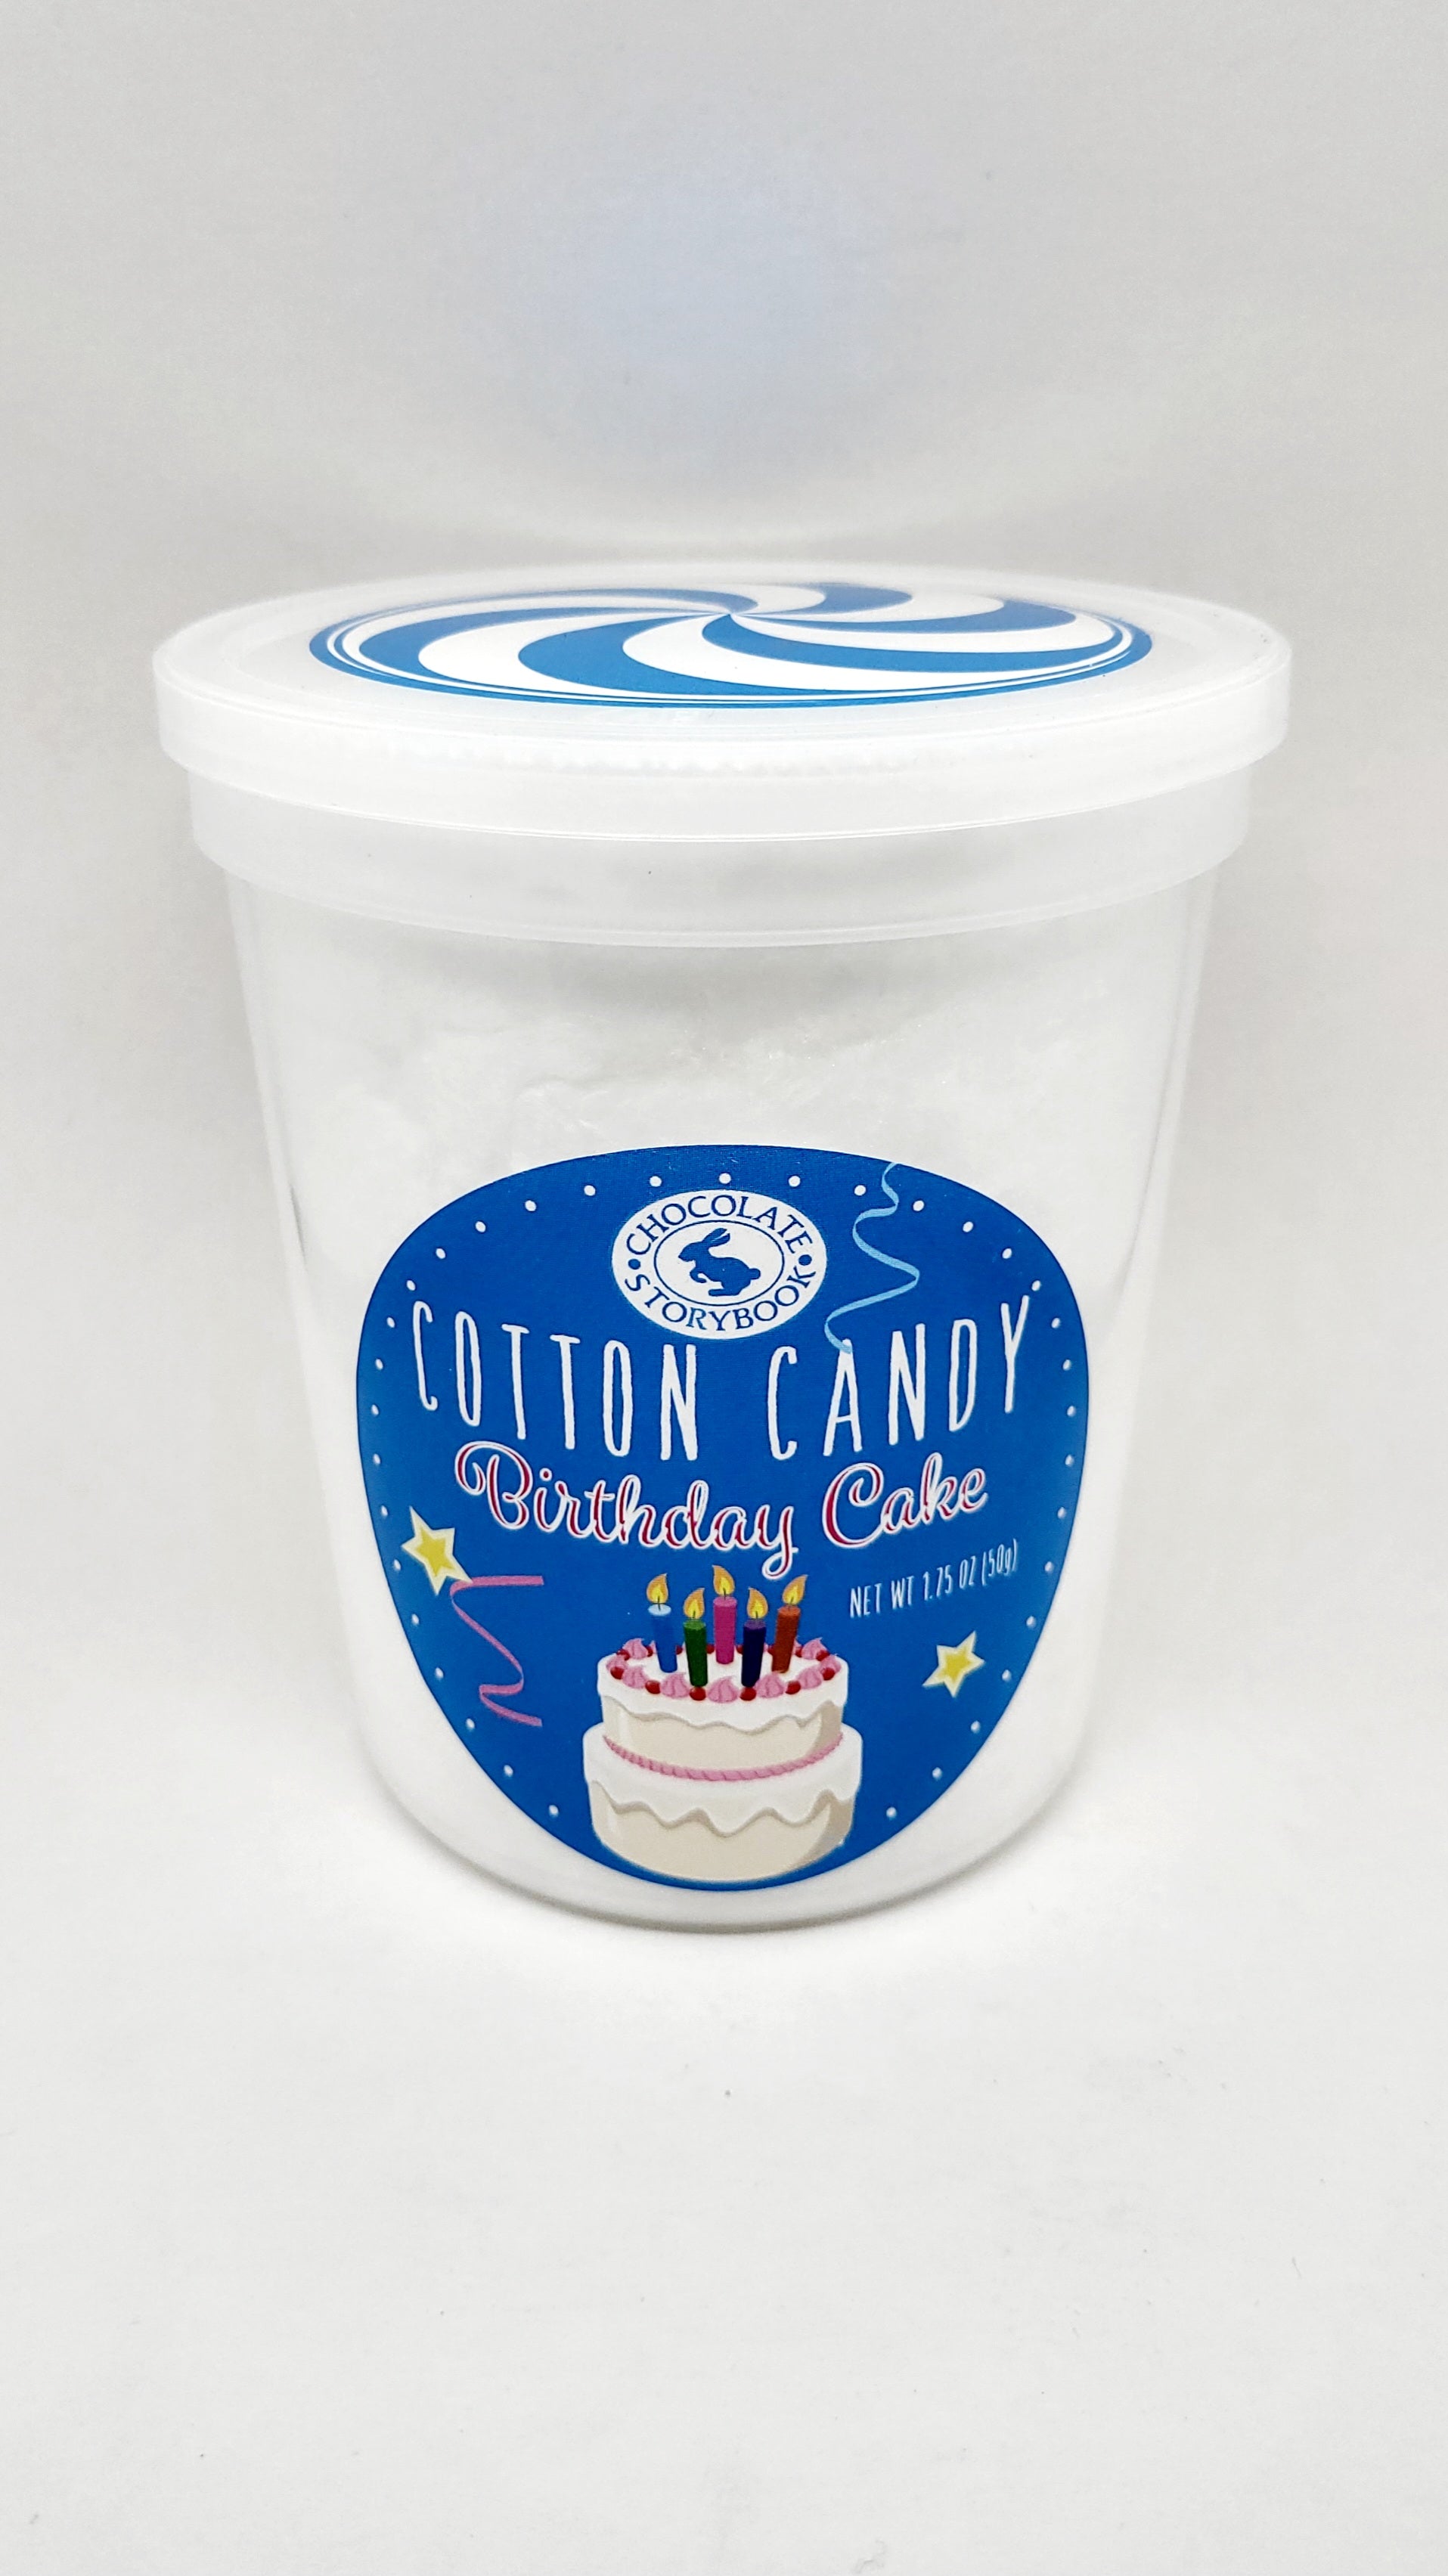 Cotton Candy – Sweetz & More